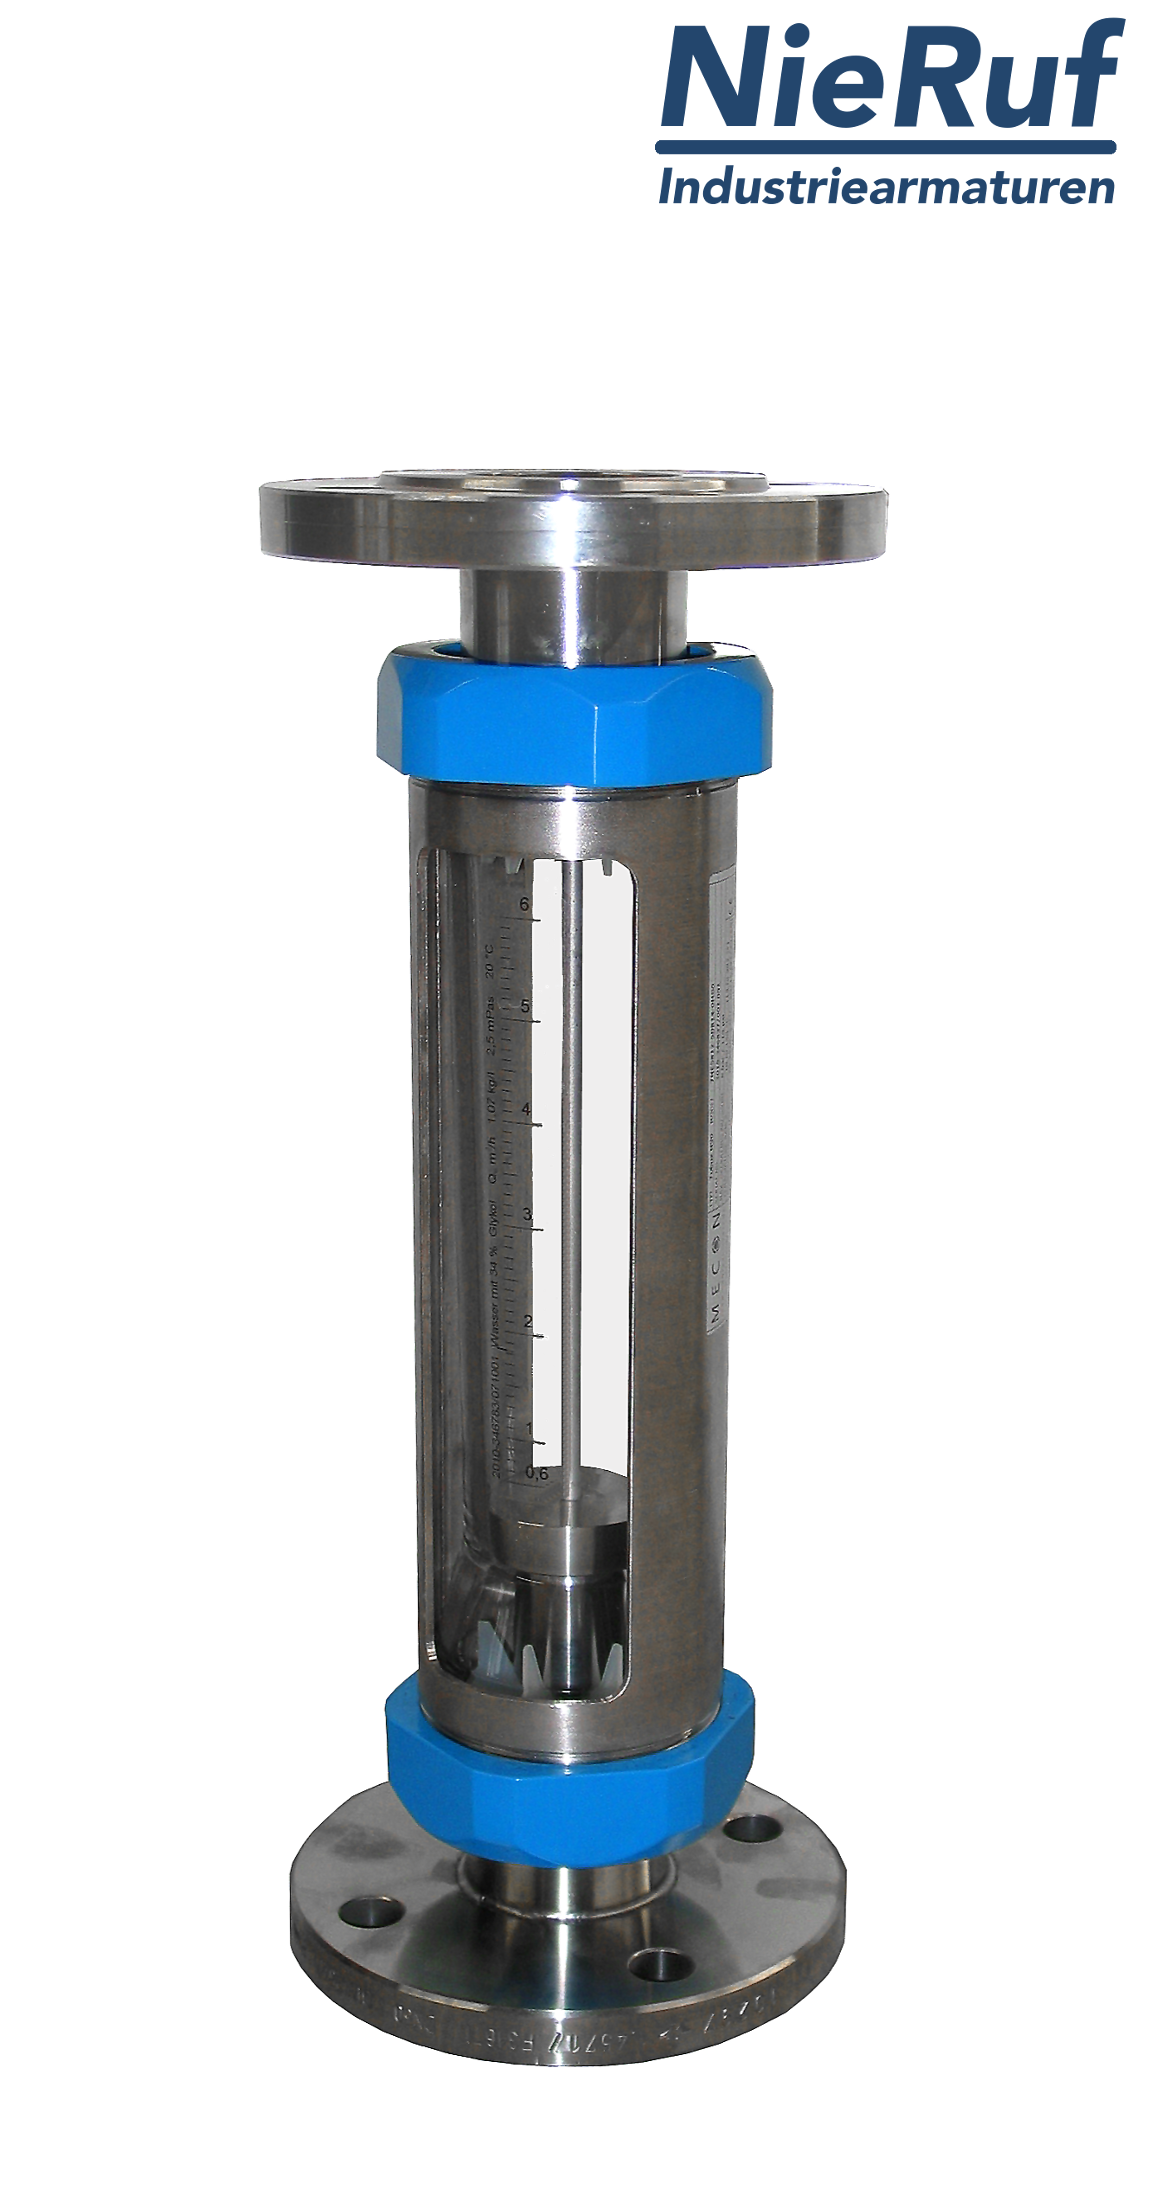 Variable area flowmeter stainless steel + borosilicate flange DN20 1.6 - 16.0 l/h water FKM